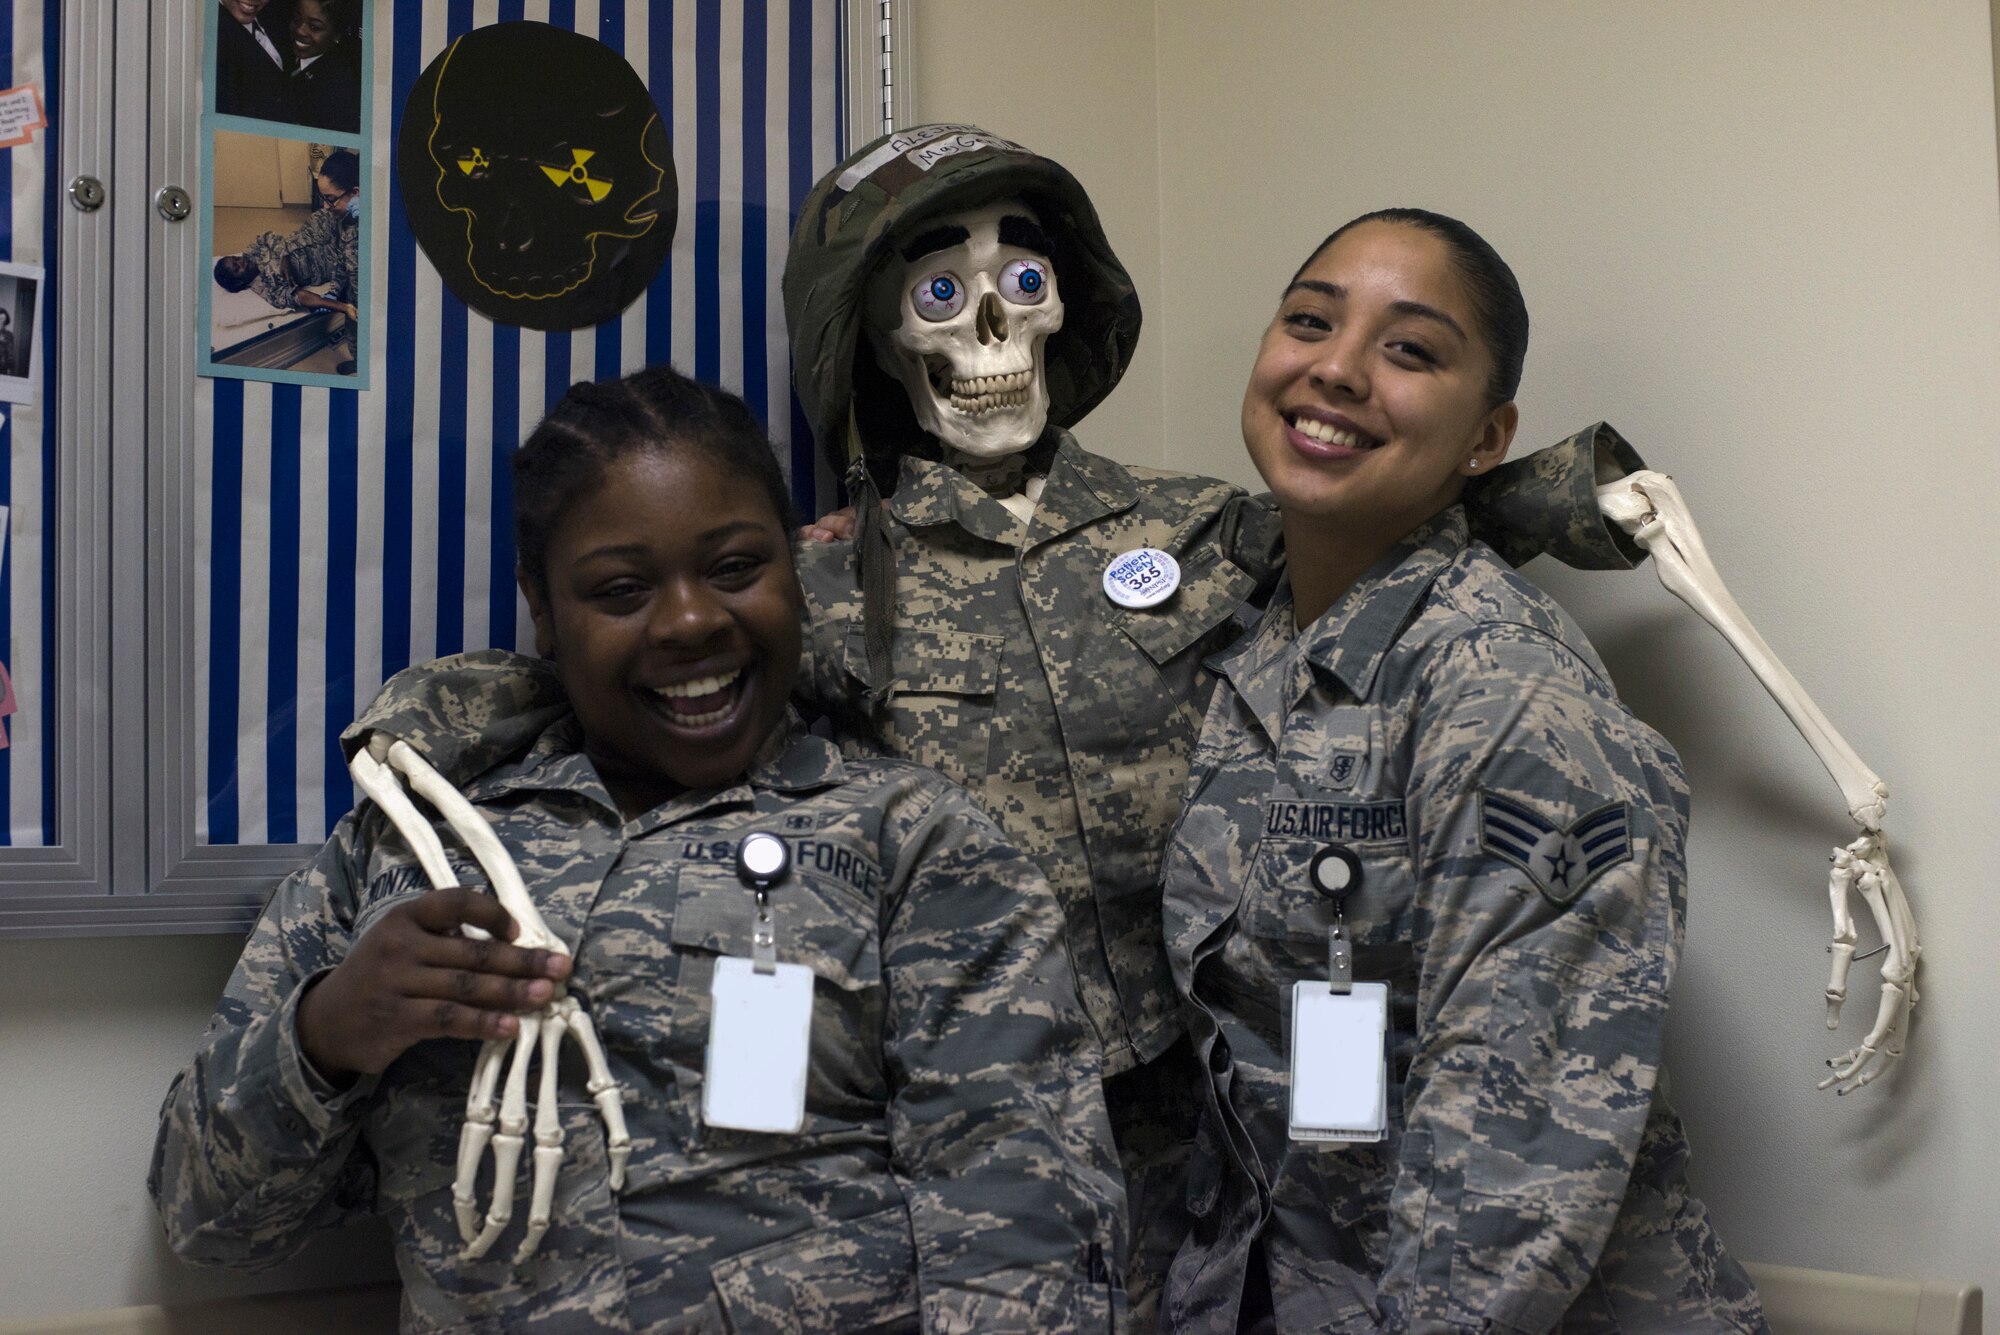 U.S. Air Force Senior Airman Shirell Montague, left, a 35th Surgical Operations Squadron radiology technologist, and Senior Airman Darae Aguilar, a 35th SGC diagnostic imaging technician, pose with the radiologist mascot, “Maj. Gen. Alejandro,” at Misawa Air Base, Japan, April 10, 2019. Team Misawa members can pose with the mascot for comedy aiding in unit morale and readiness. (U.S. Air Force photo by Senior Airman Collette Brooks)